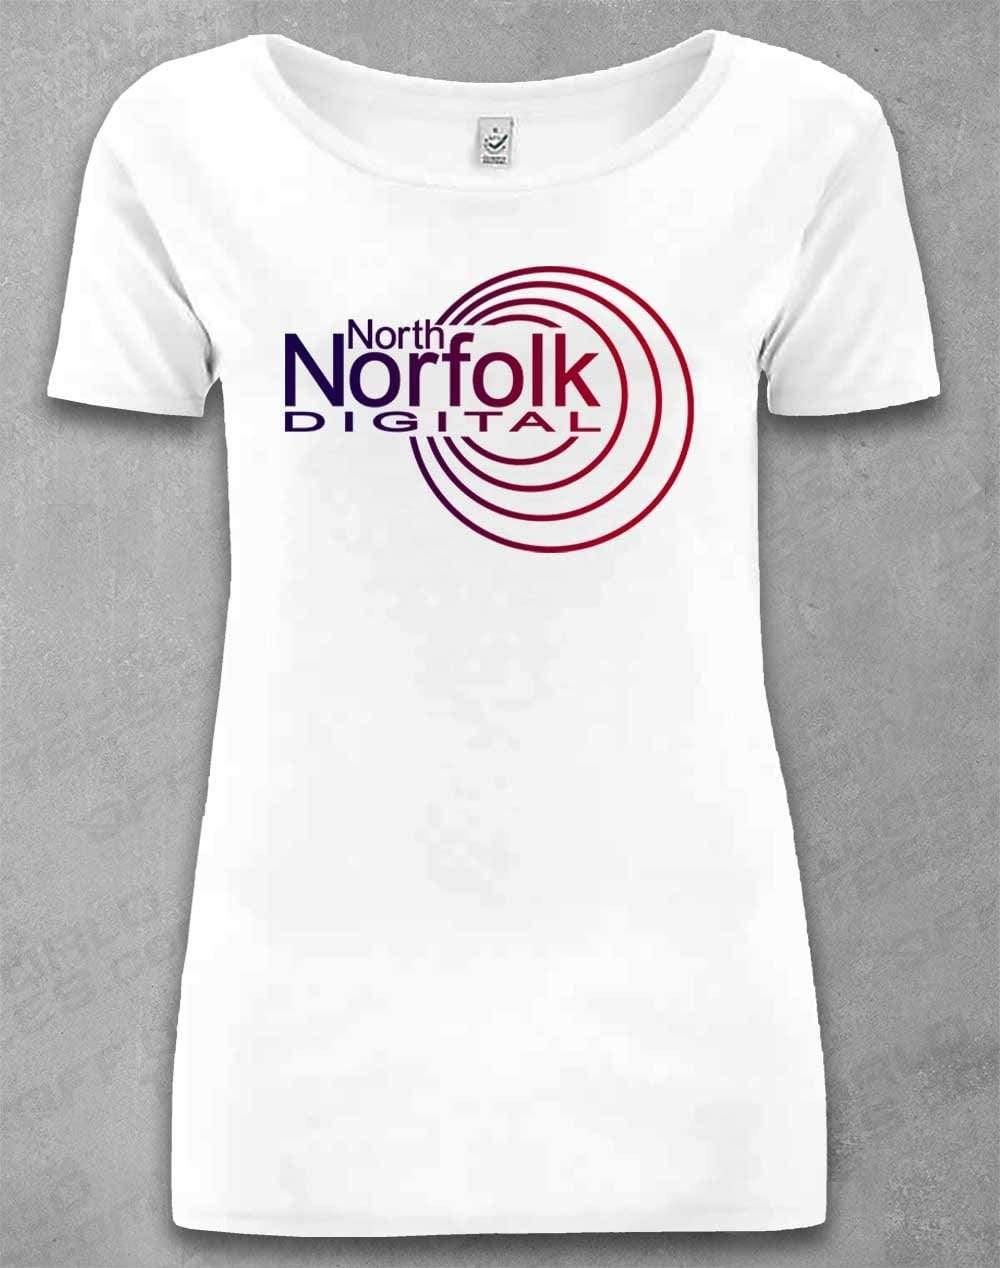 DELUXE North Norfolk Digital Organic Scoop Neck T-Shirt 8-10 / White  - Off World Tees